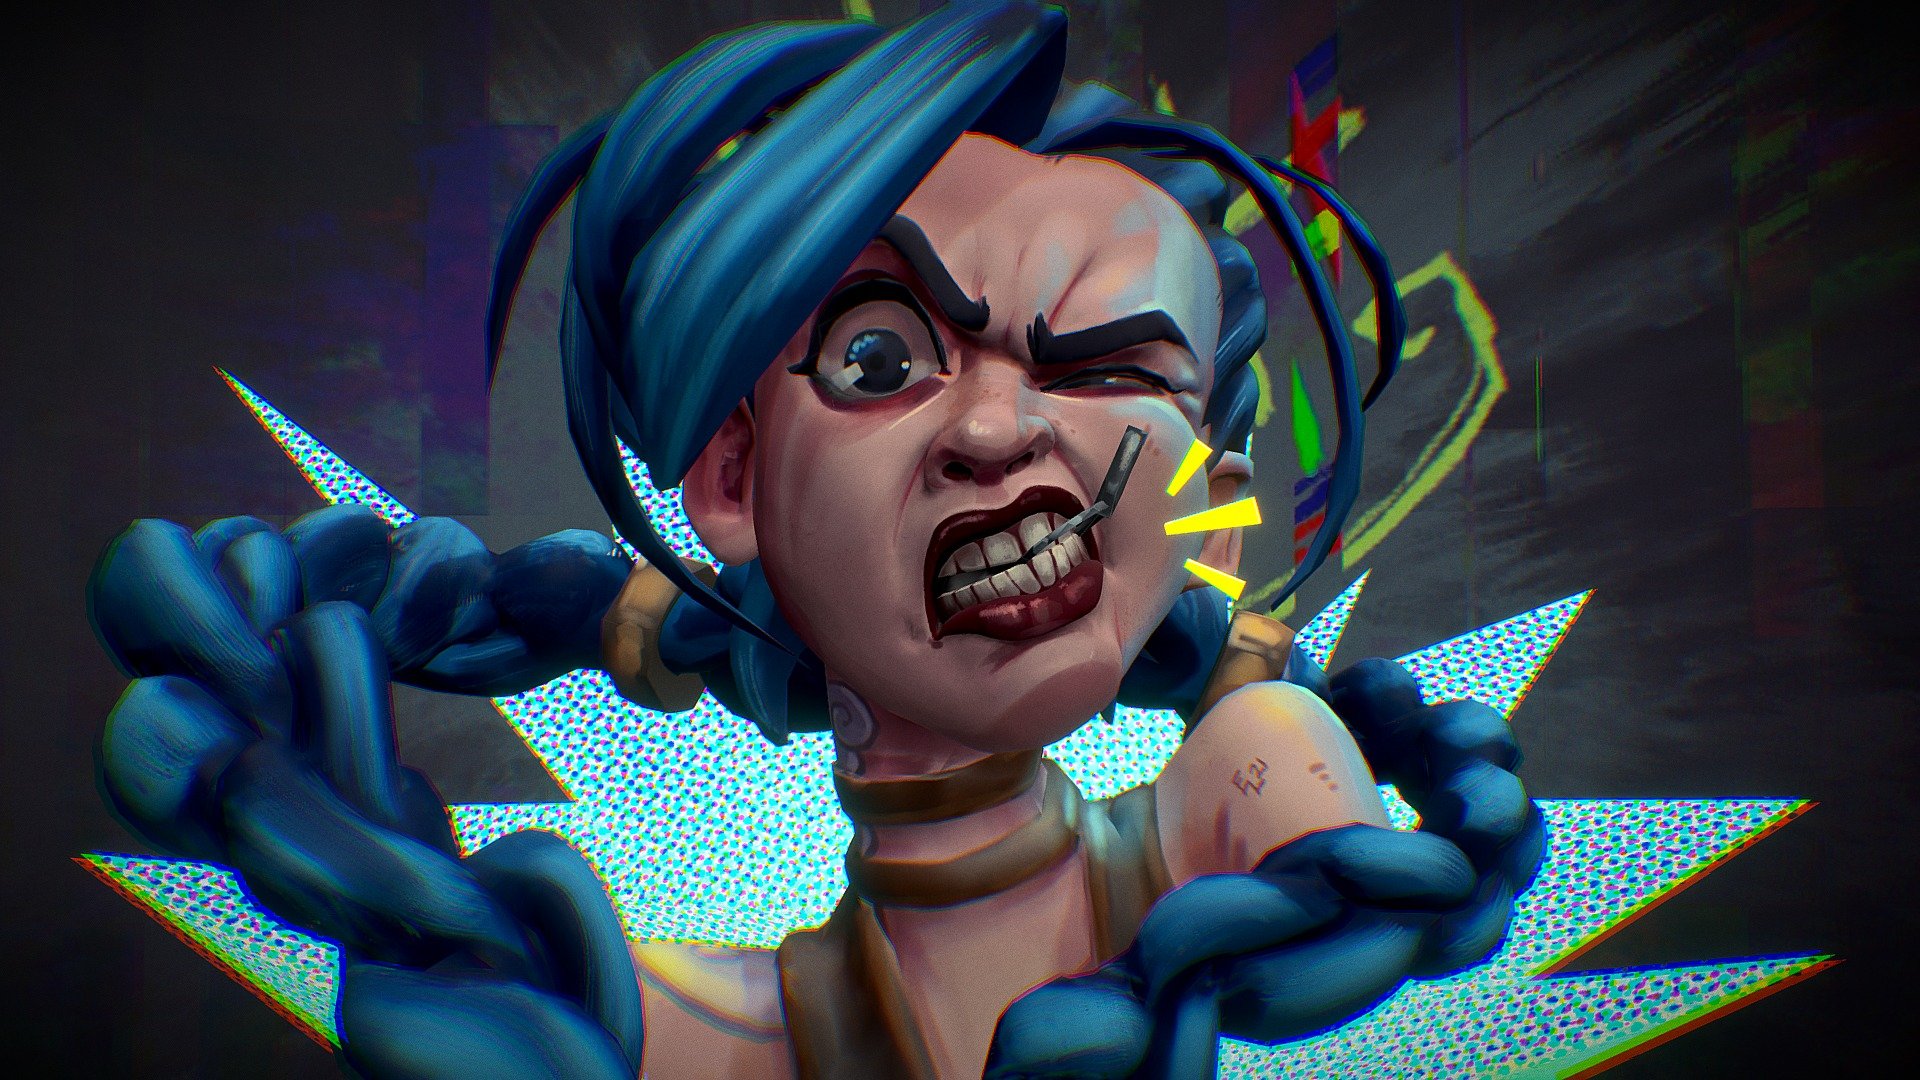 Jinx from Arcane!
Sculpted and painted completely on the iPad using Nomad and ProCreate.
Feel free to download and repaint!

Check out a speed walkthrough of the creation process here: 
https://youtu.be/zDkaZN-0Tr4 - JINX! - Download Free 3D model by eric3dee 3d model